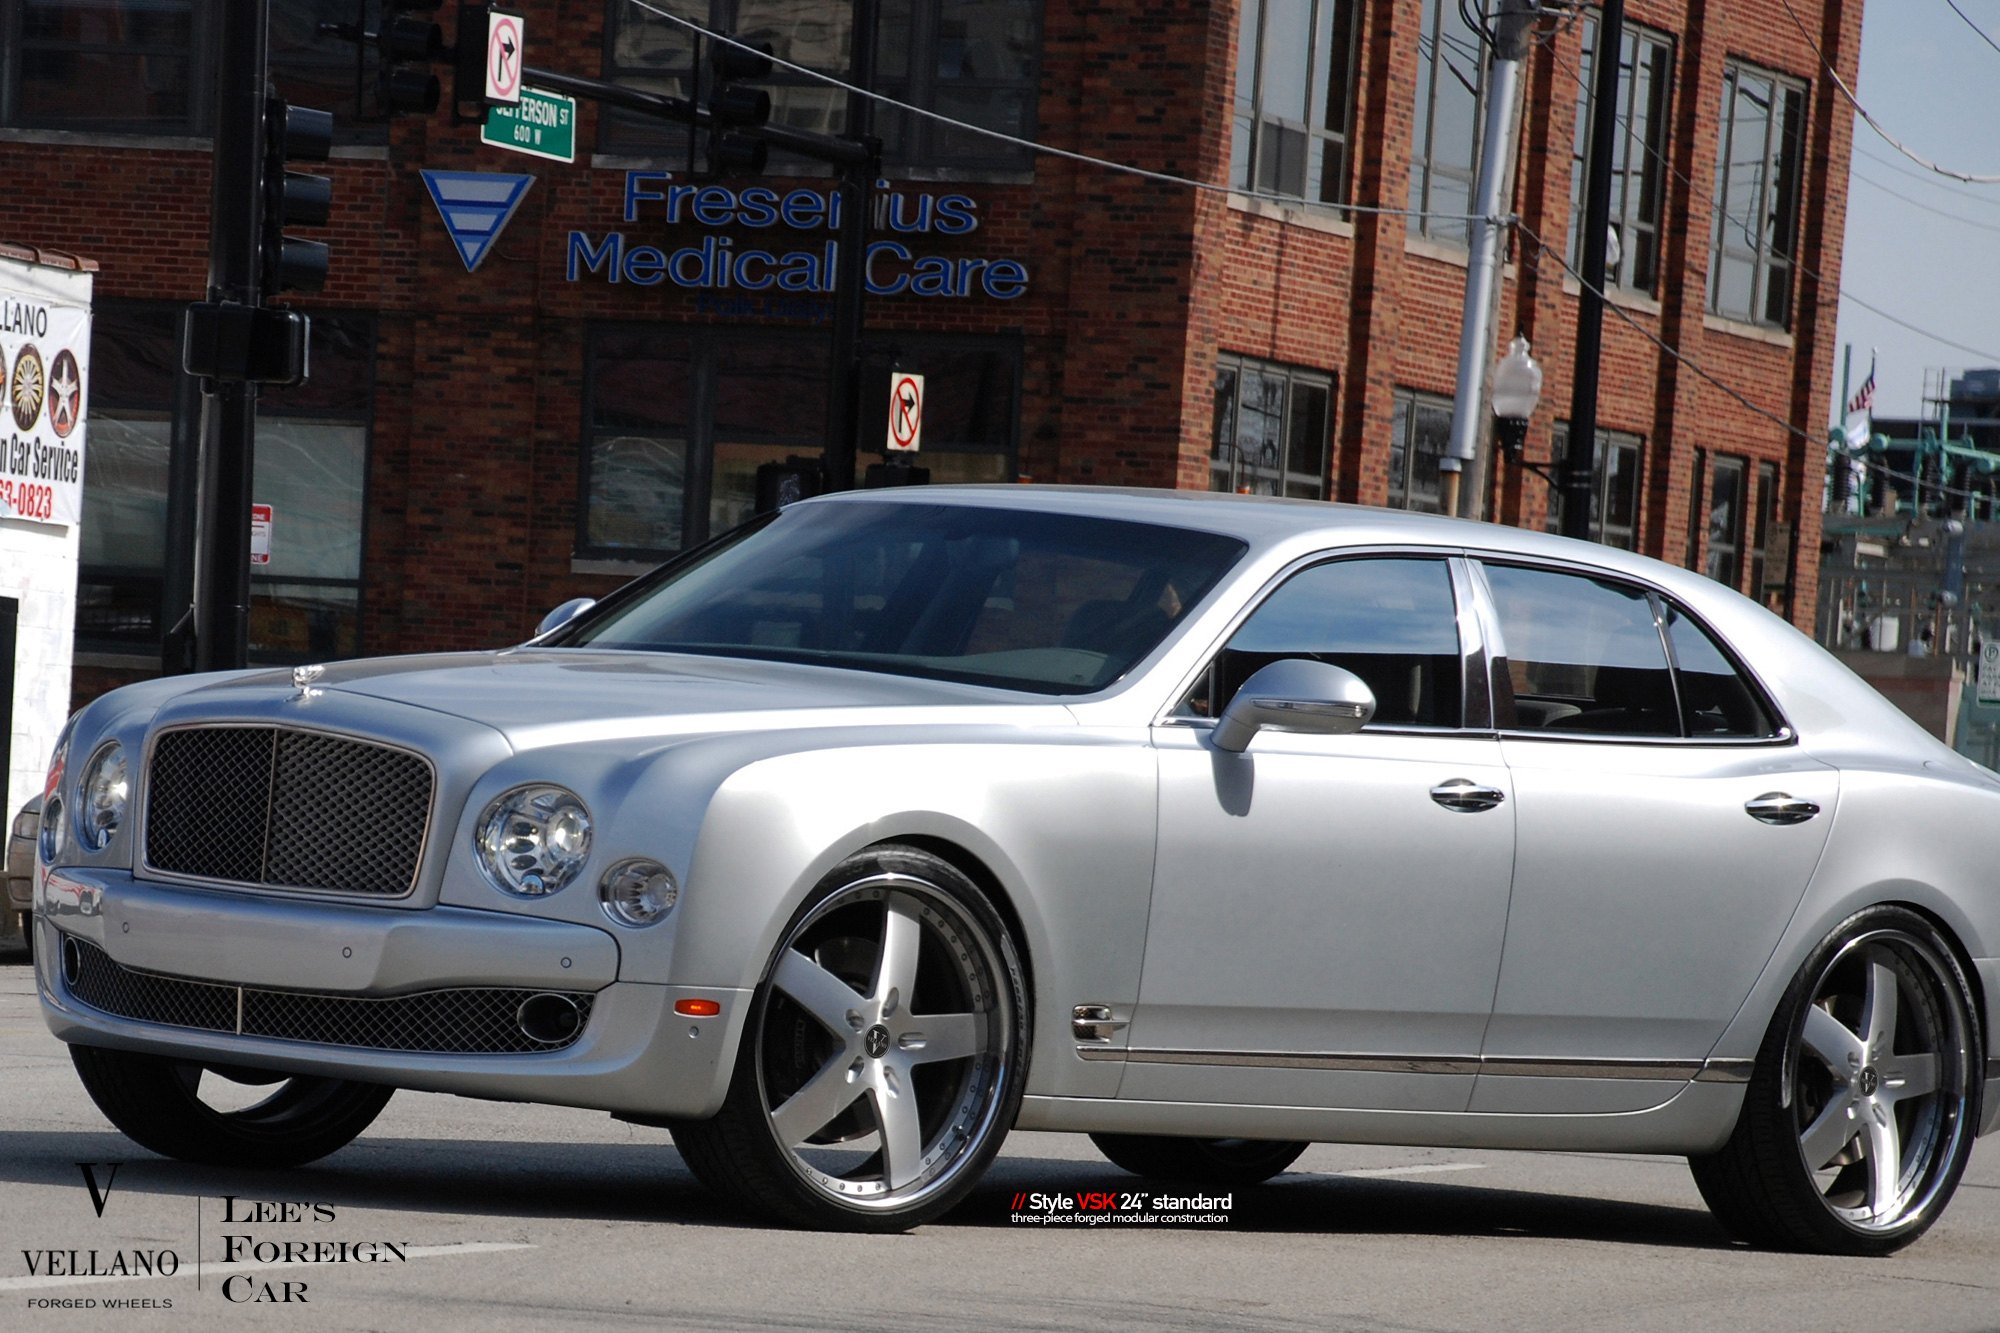 Blacked Out Grille on Silver Bently Mulsanne - Photo by Vellano